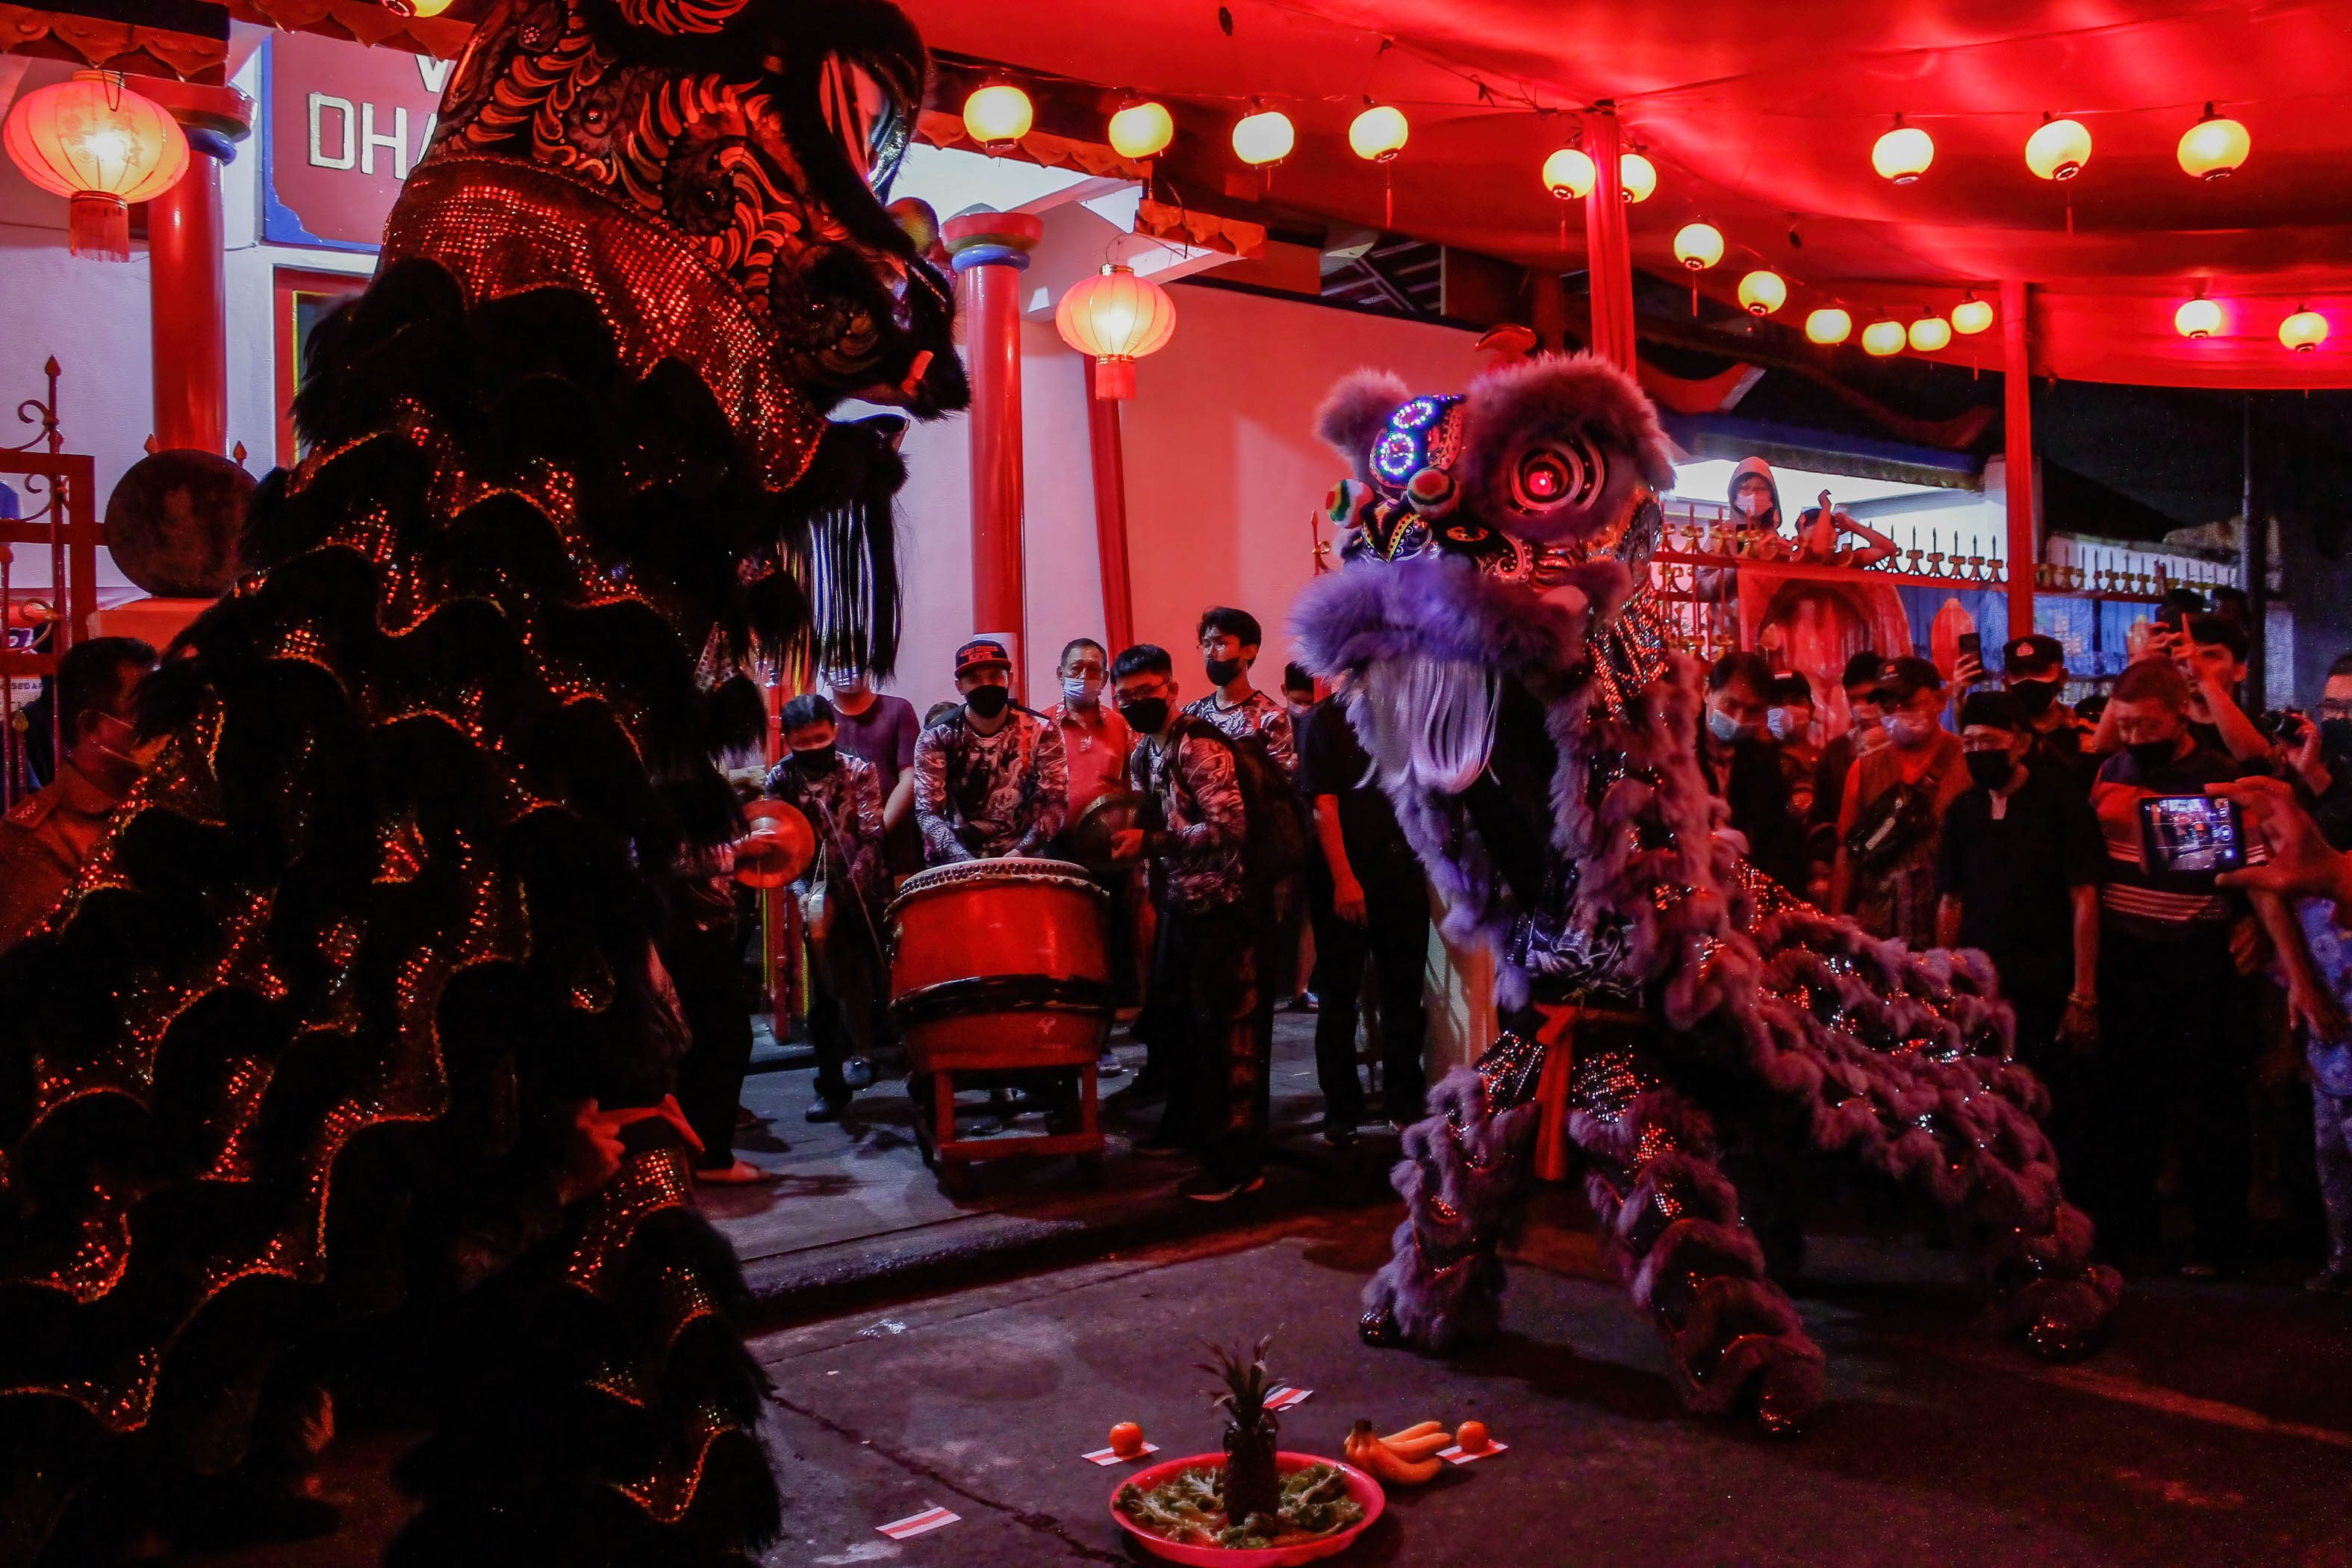 Lion Dance (Barongsai) is seen during the celebration at